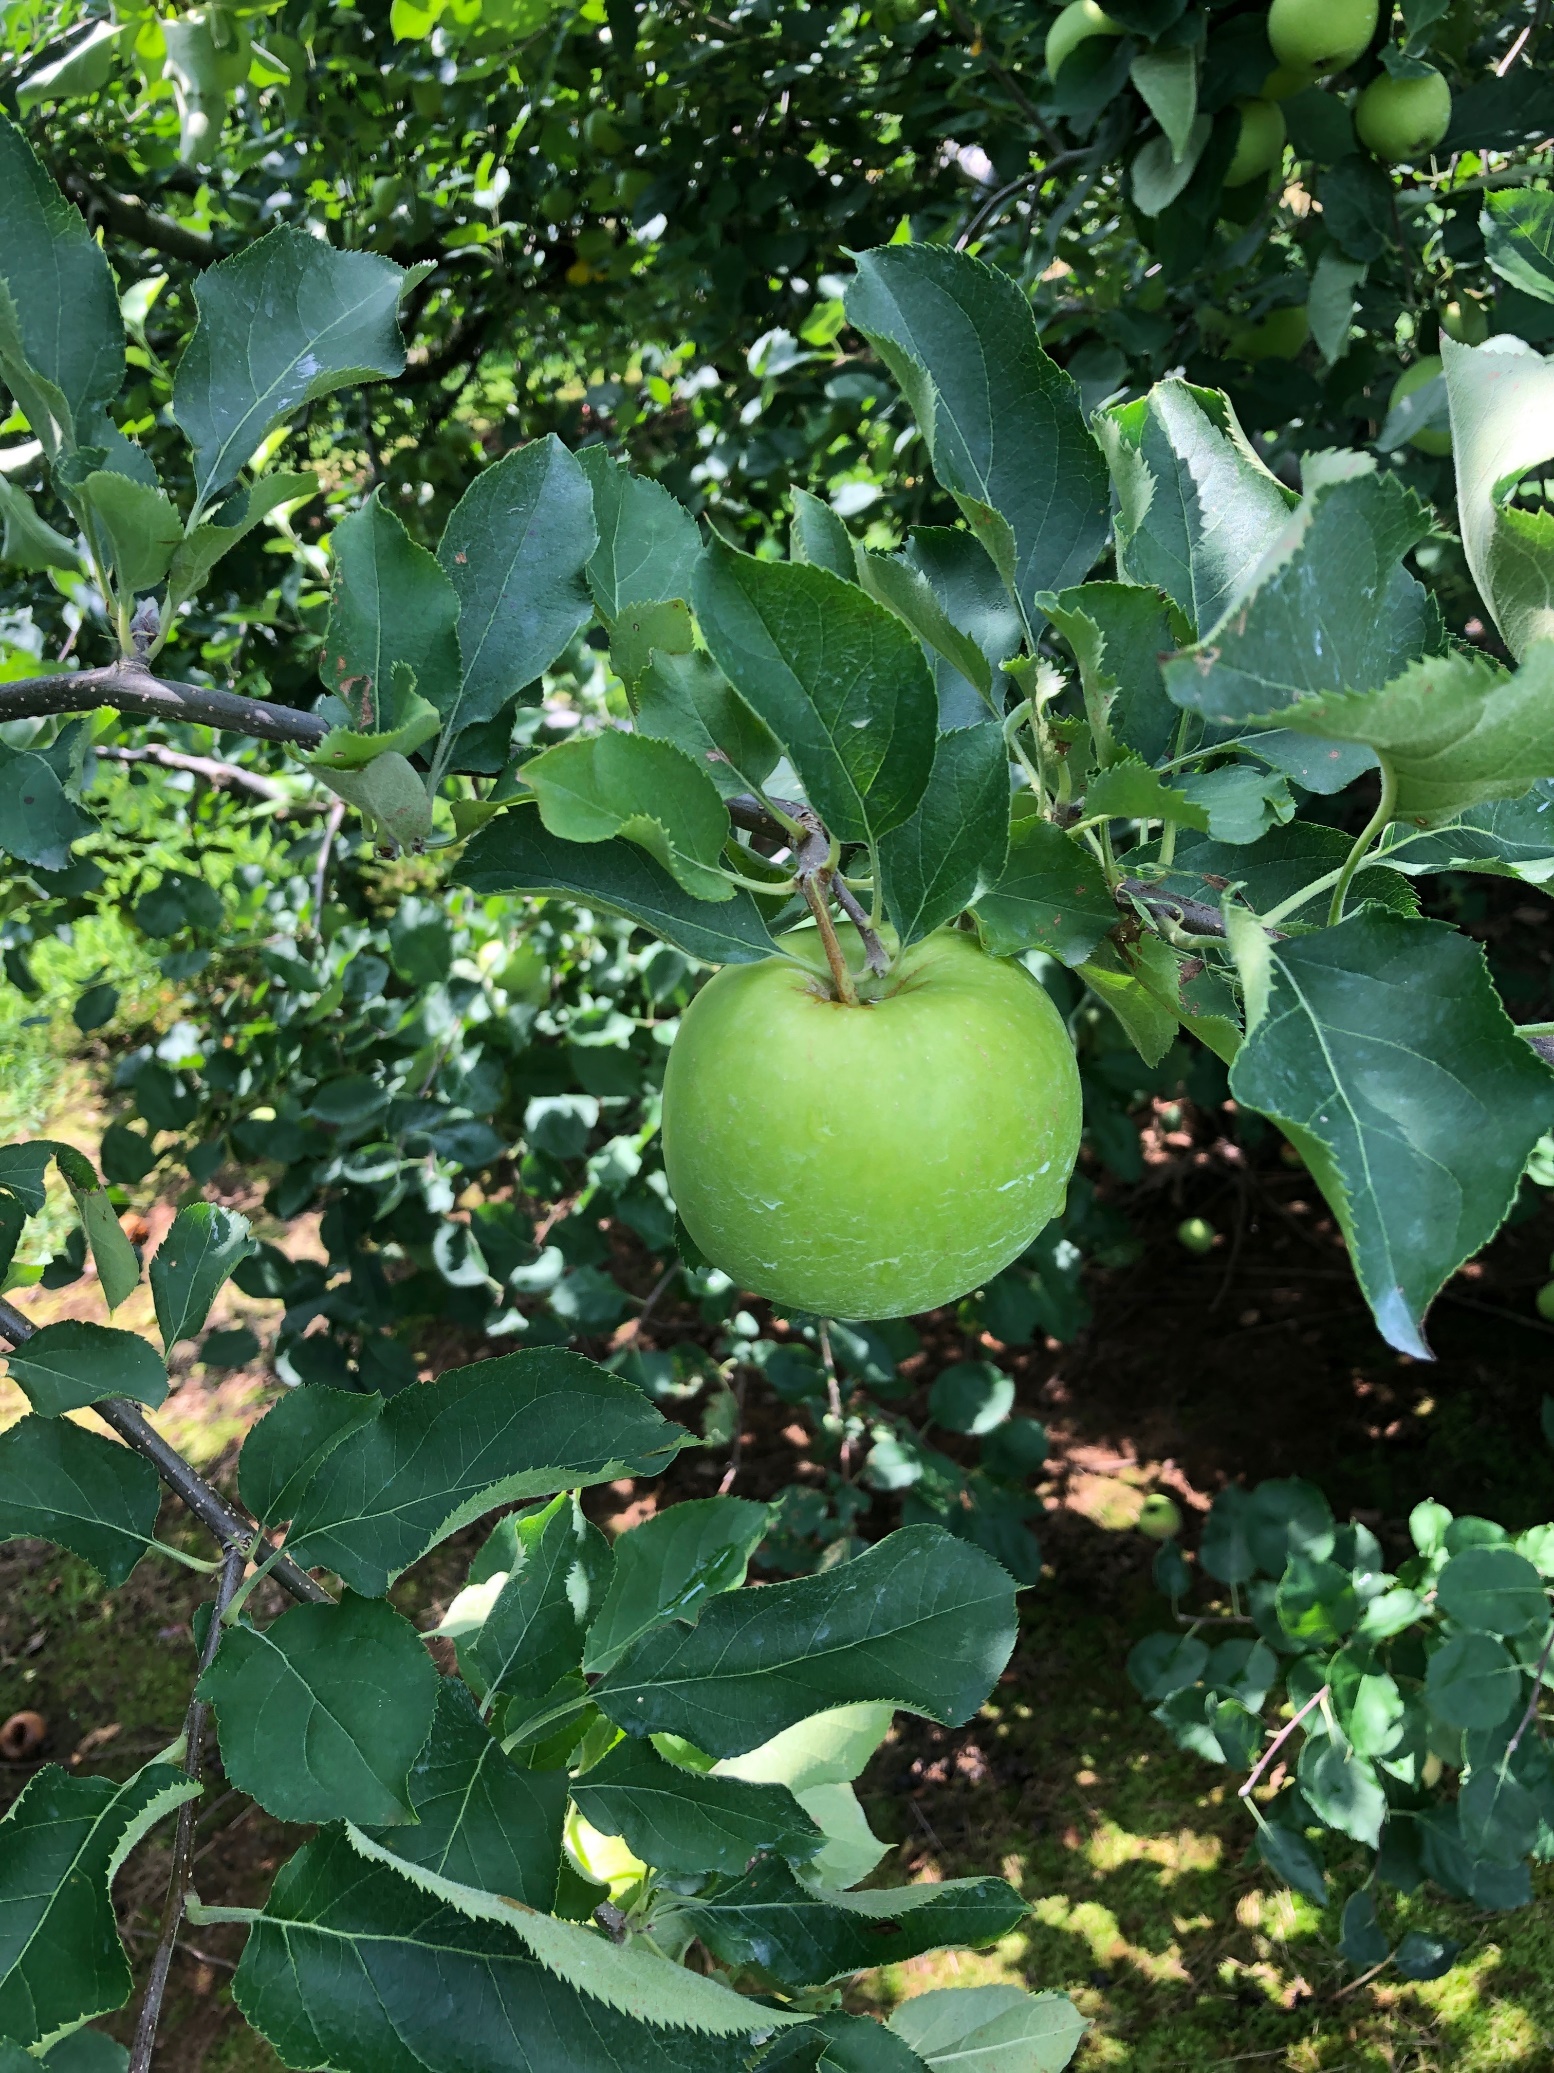 https://hgic.clemson.edu/wp-content/uploads/2021/10/granny-smith-apple-growing-in-an-orchard-in-long-c.jpeg